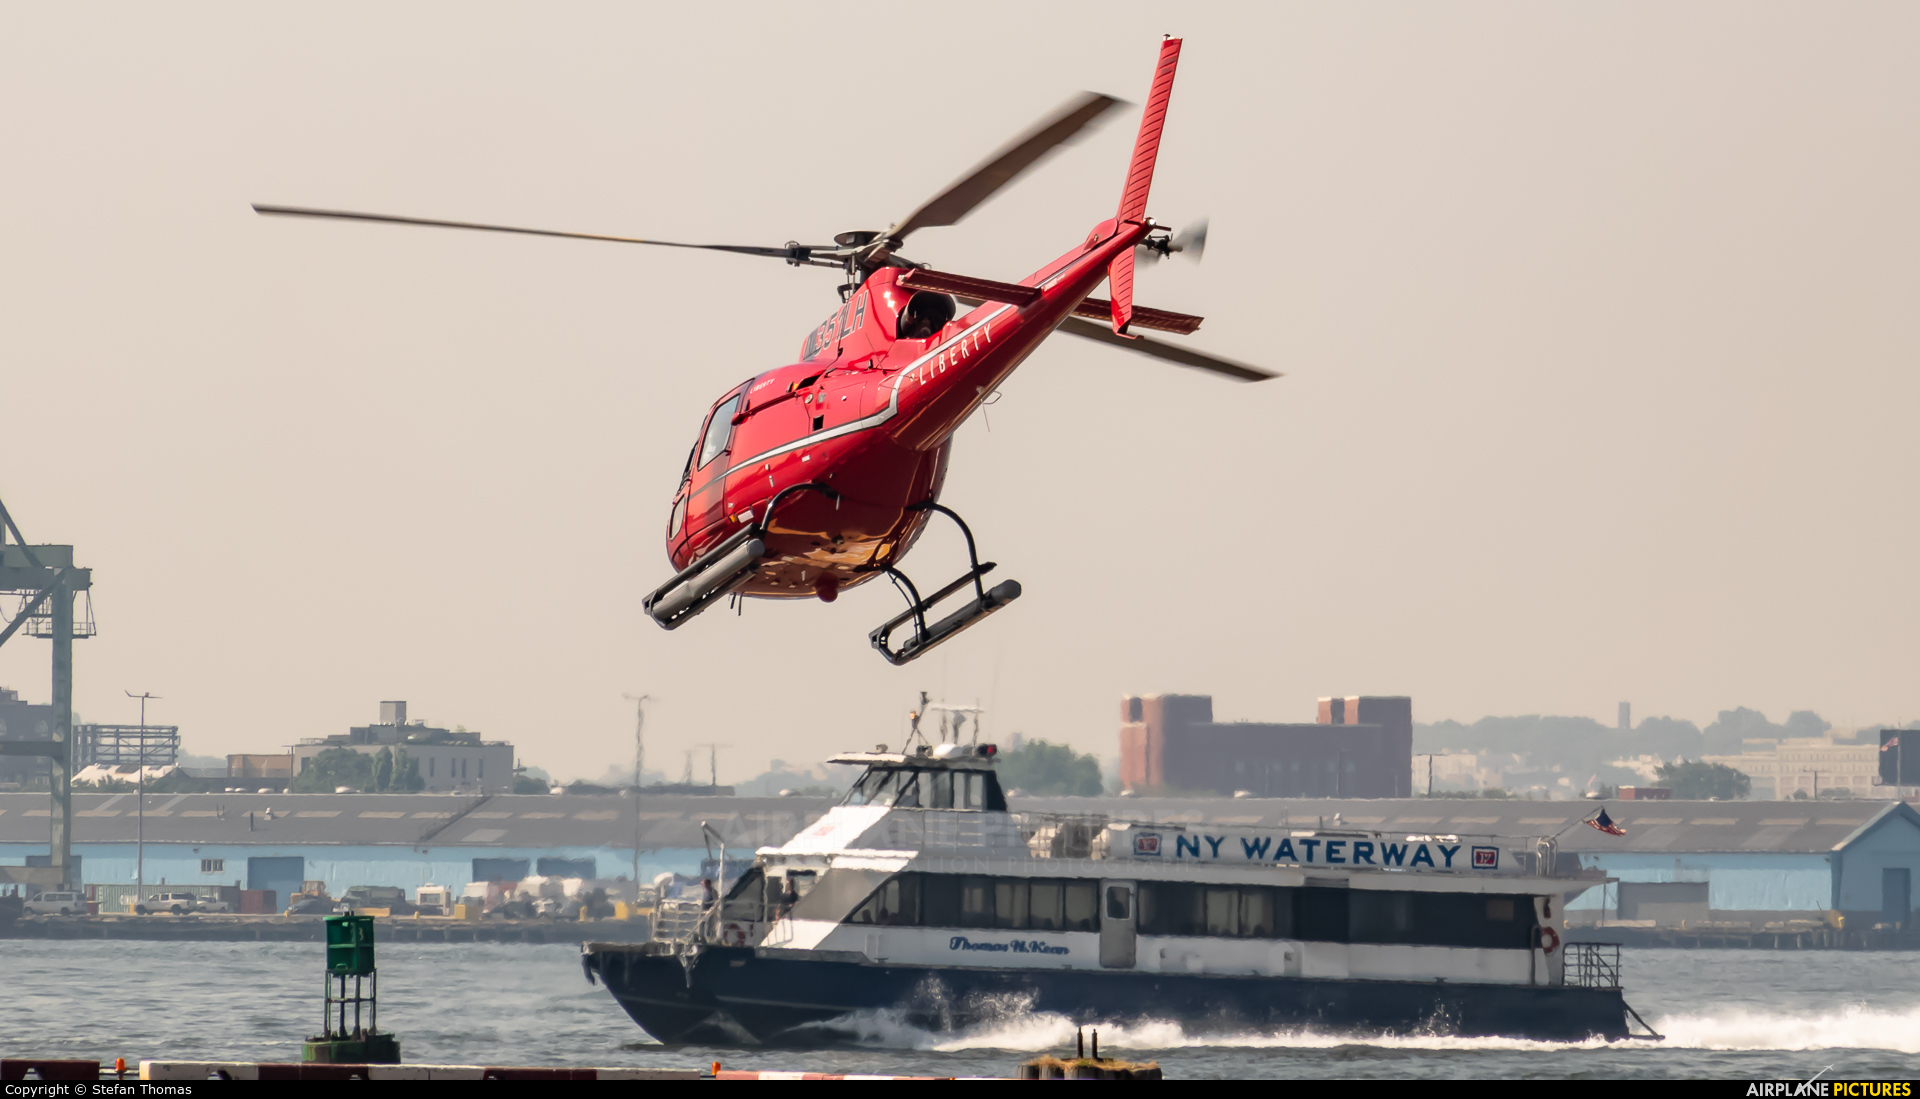 Liberty Helicopters N351LH aircraft at Downtown Manhattan Heliport